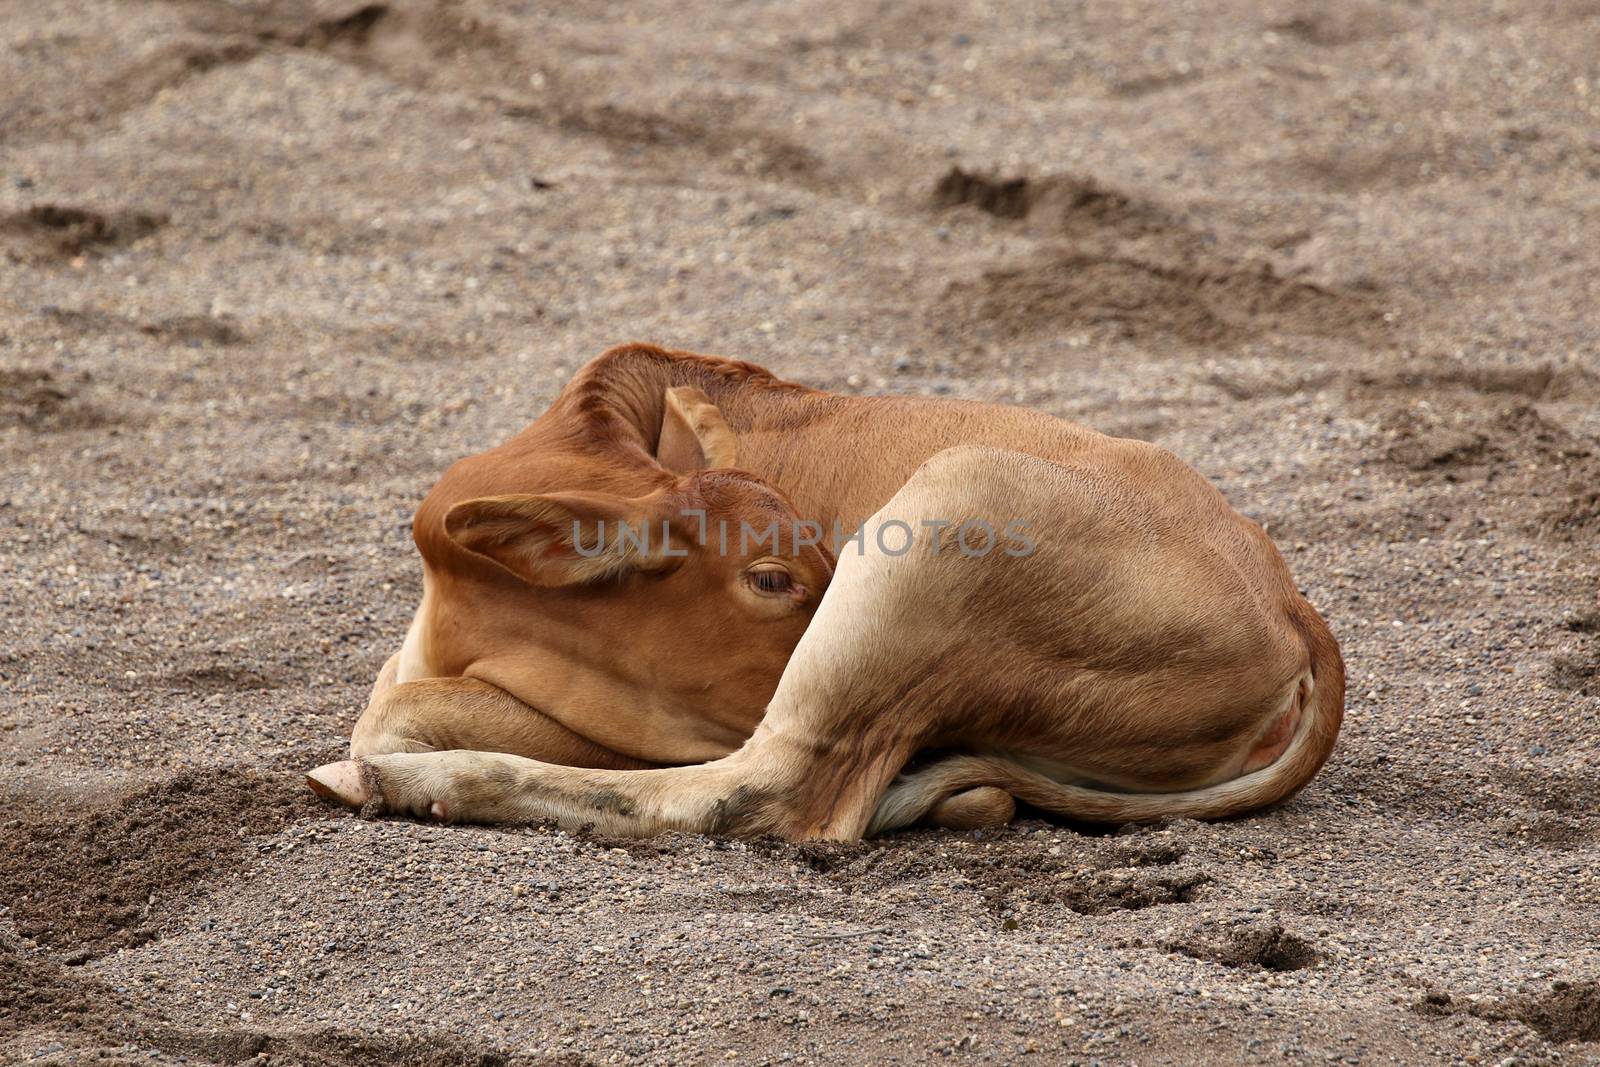 Image of a cow on sand background.